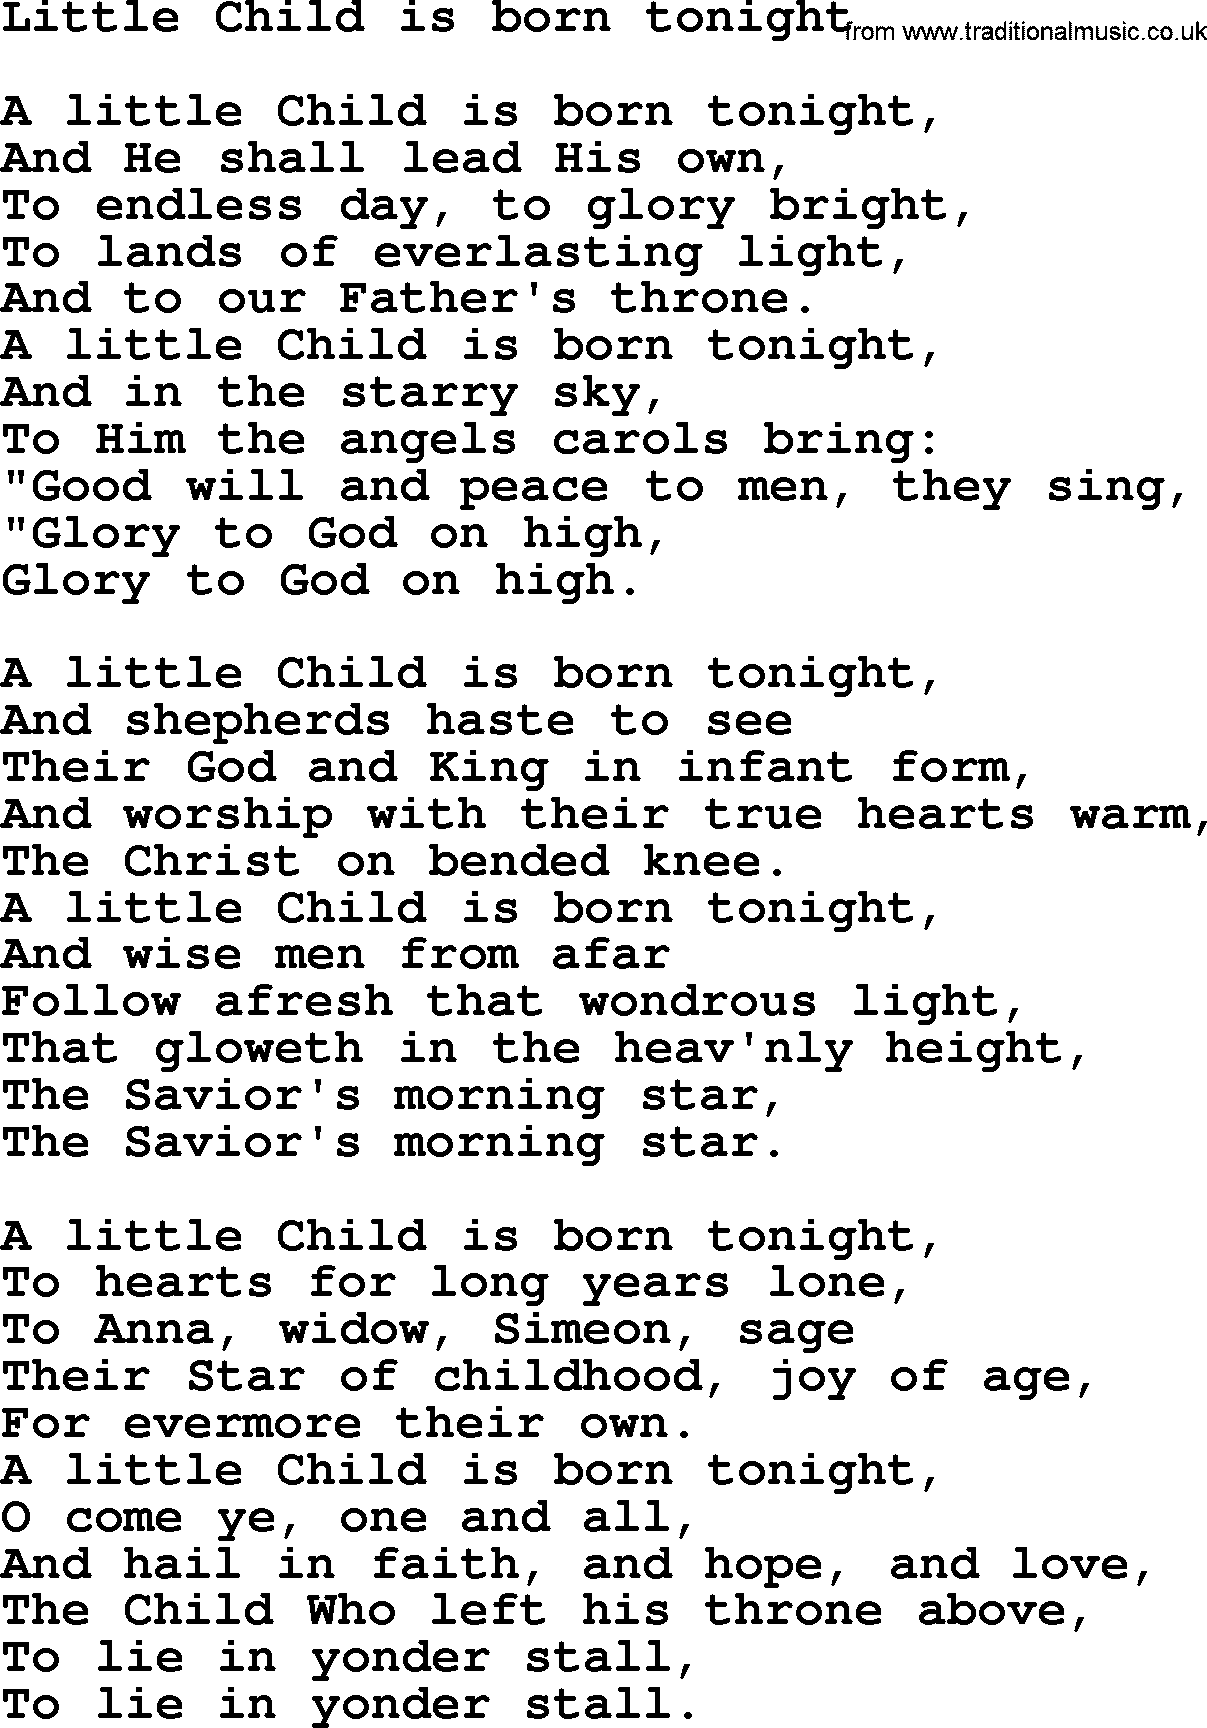 Christmas Hymns, Carols and Songs, title: Little Child Is Born Tonight - complete lyrics, and PDF